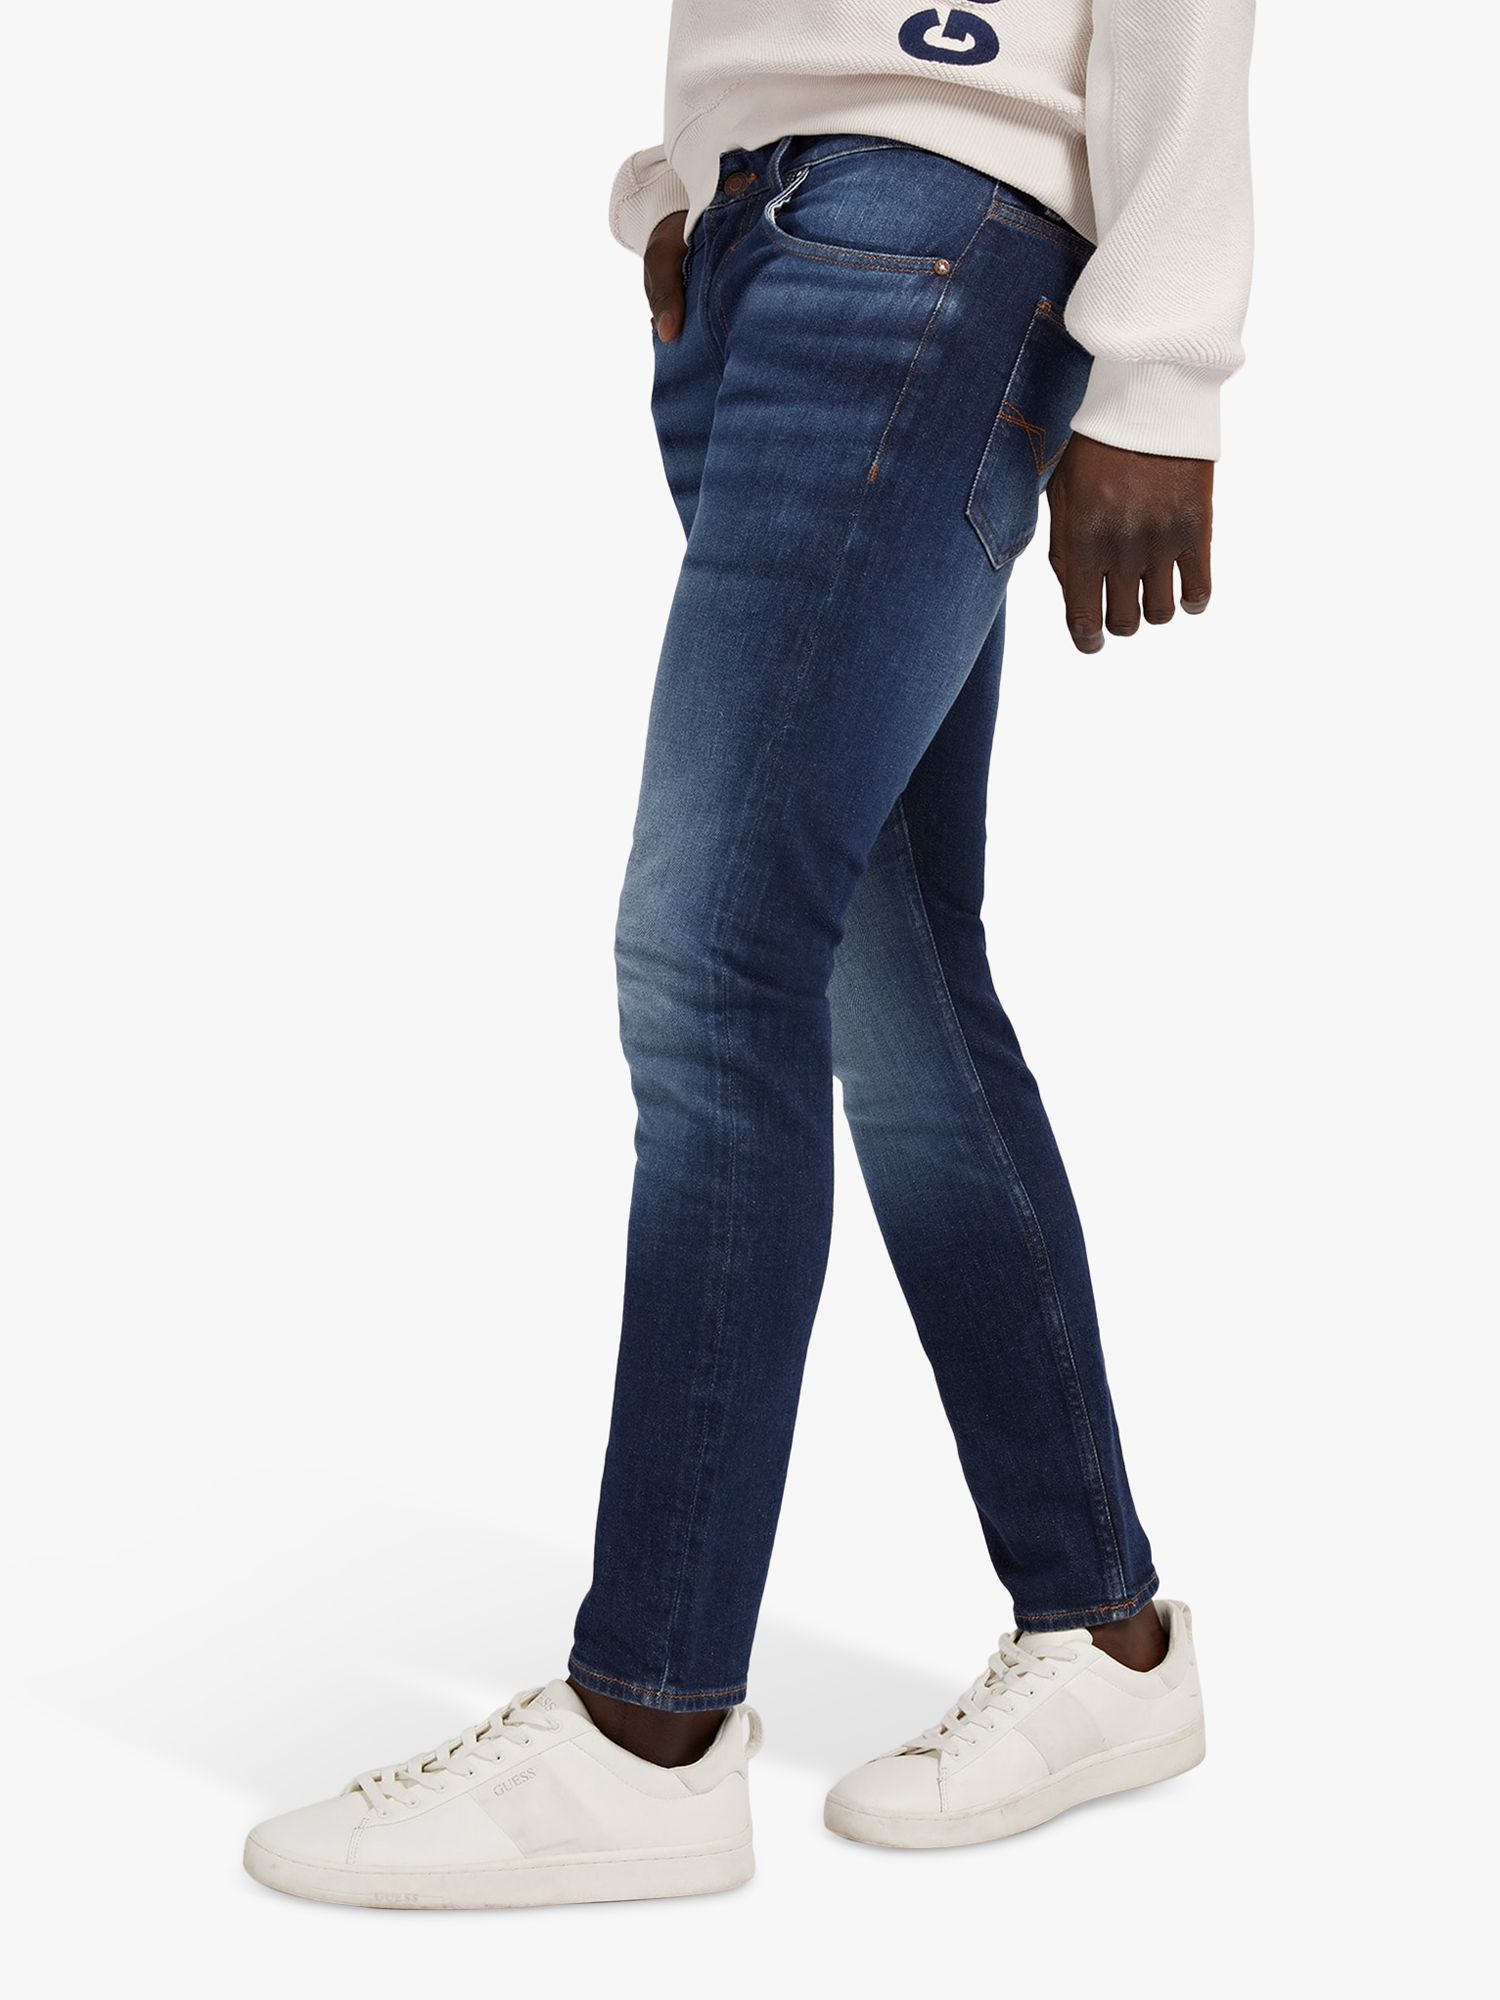 afstand Frank motto GUESS Miami Skinny Fit Jeans, Carry Dark at John Lewis & Partners